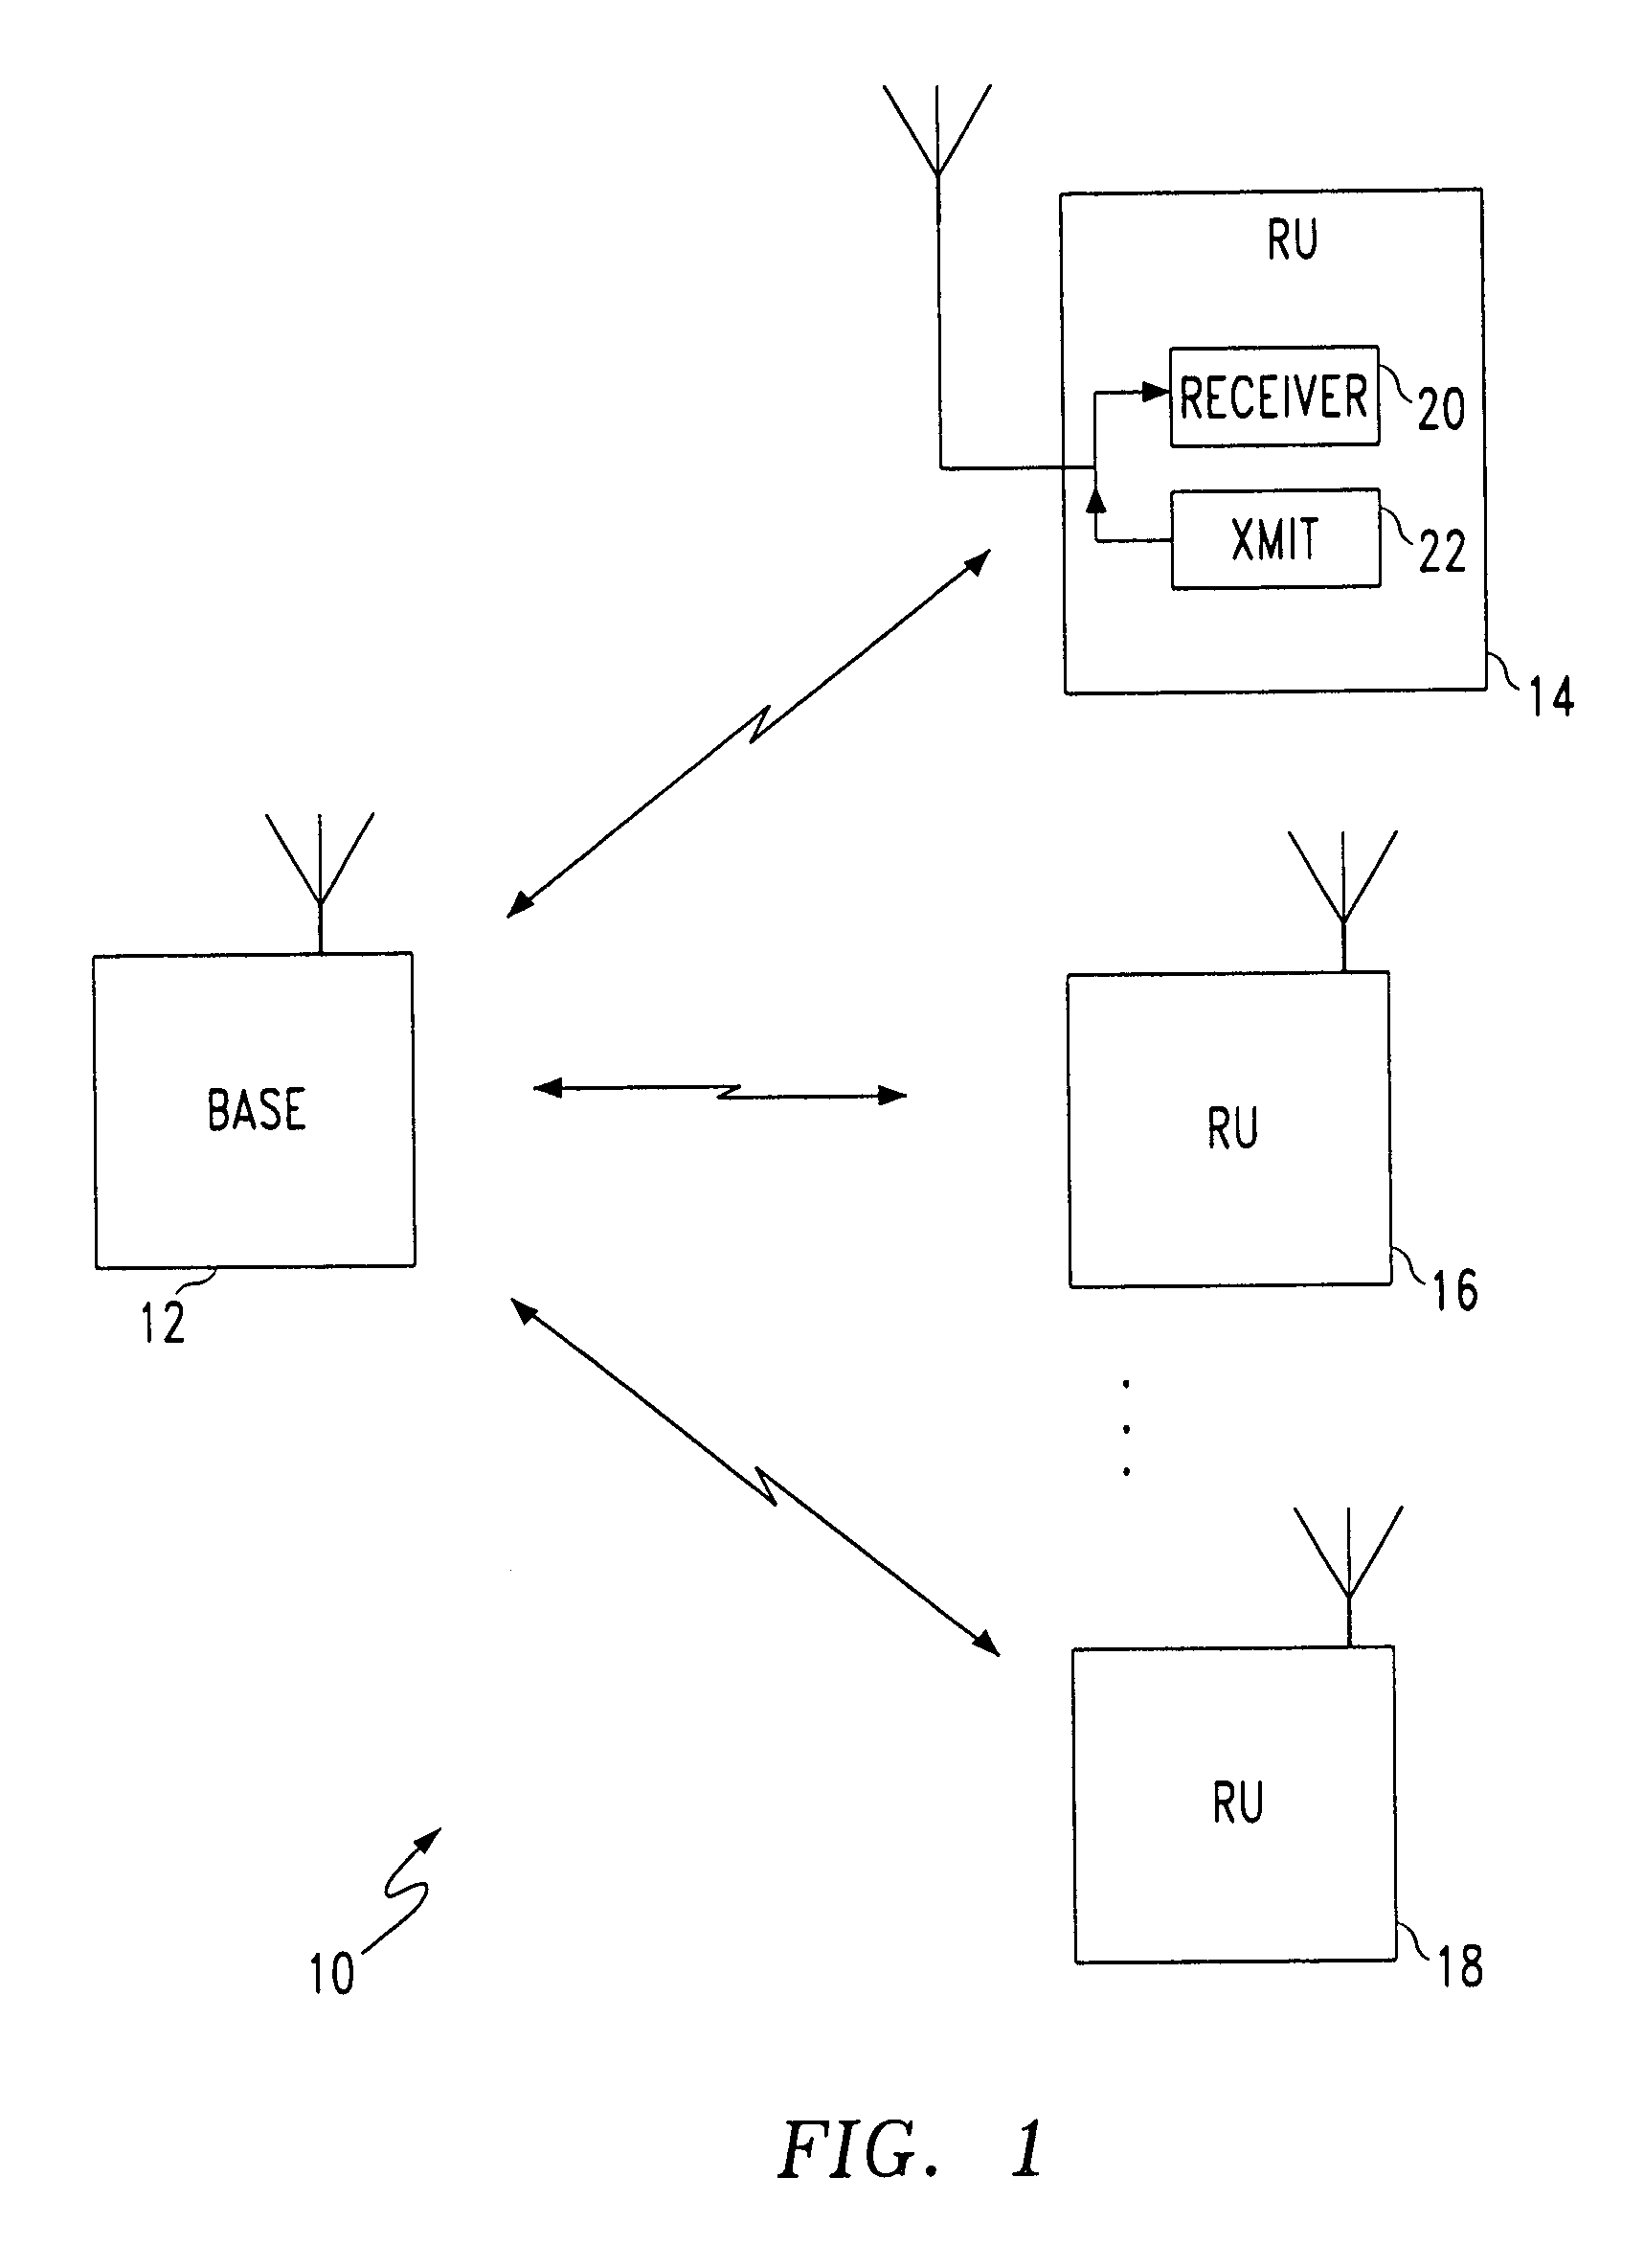 Collision-free multiple access reservation scheme for multi-tone modulation links